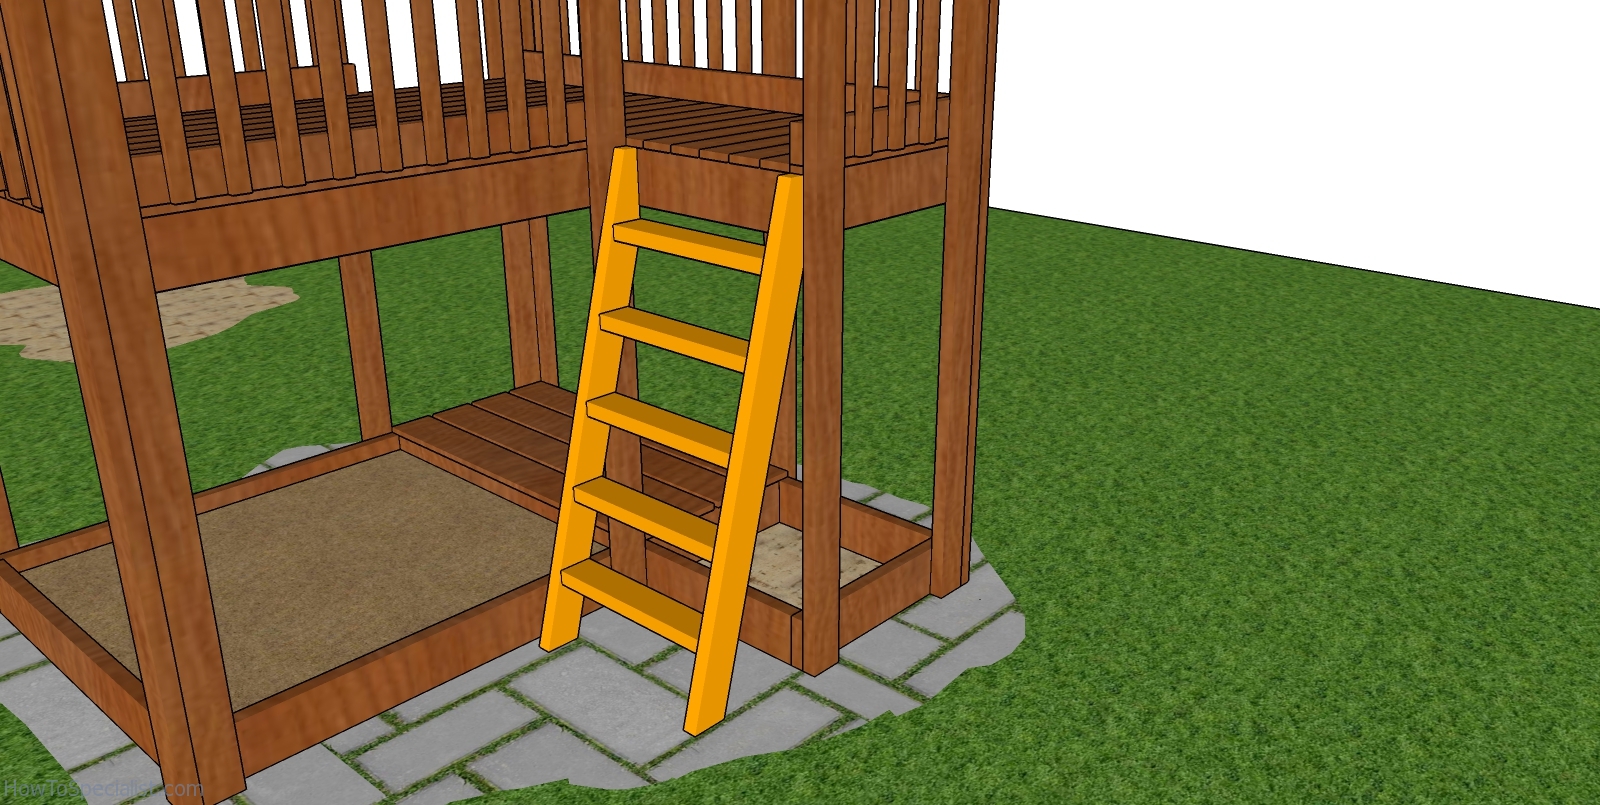 Fitting The Ladder Outdoor Playhouse Howtospecialist How To Build